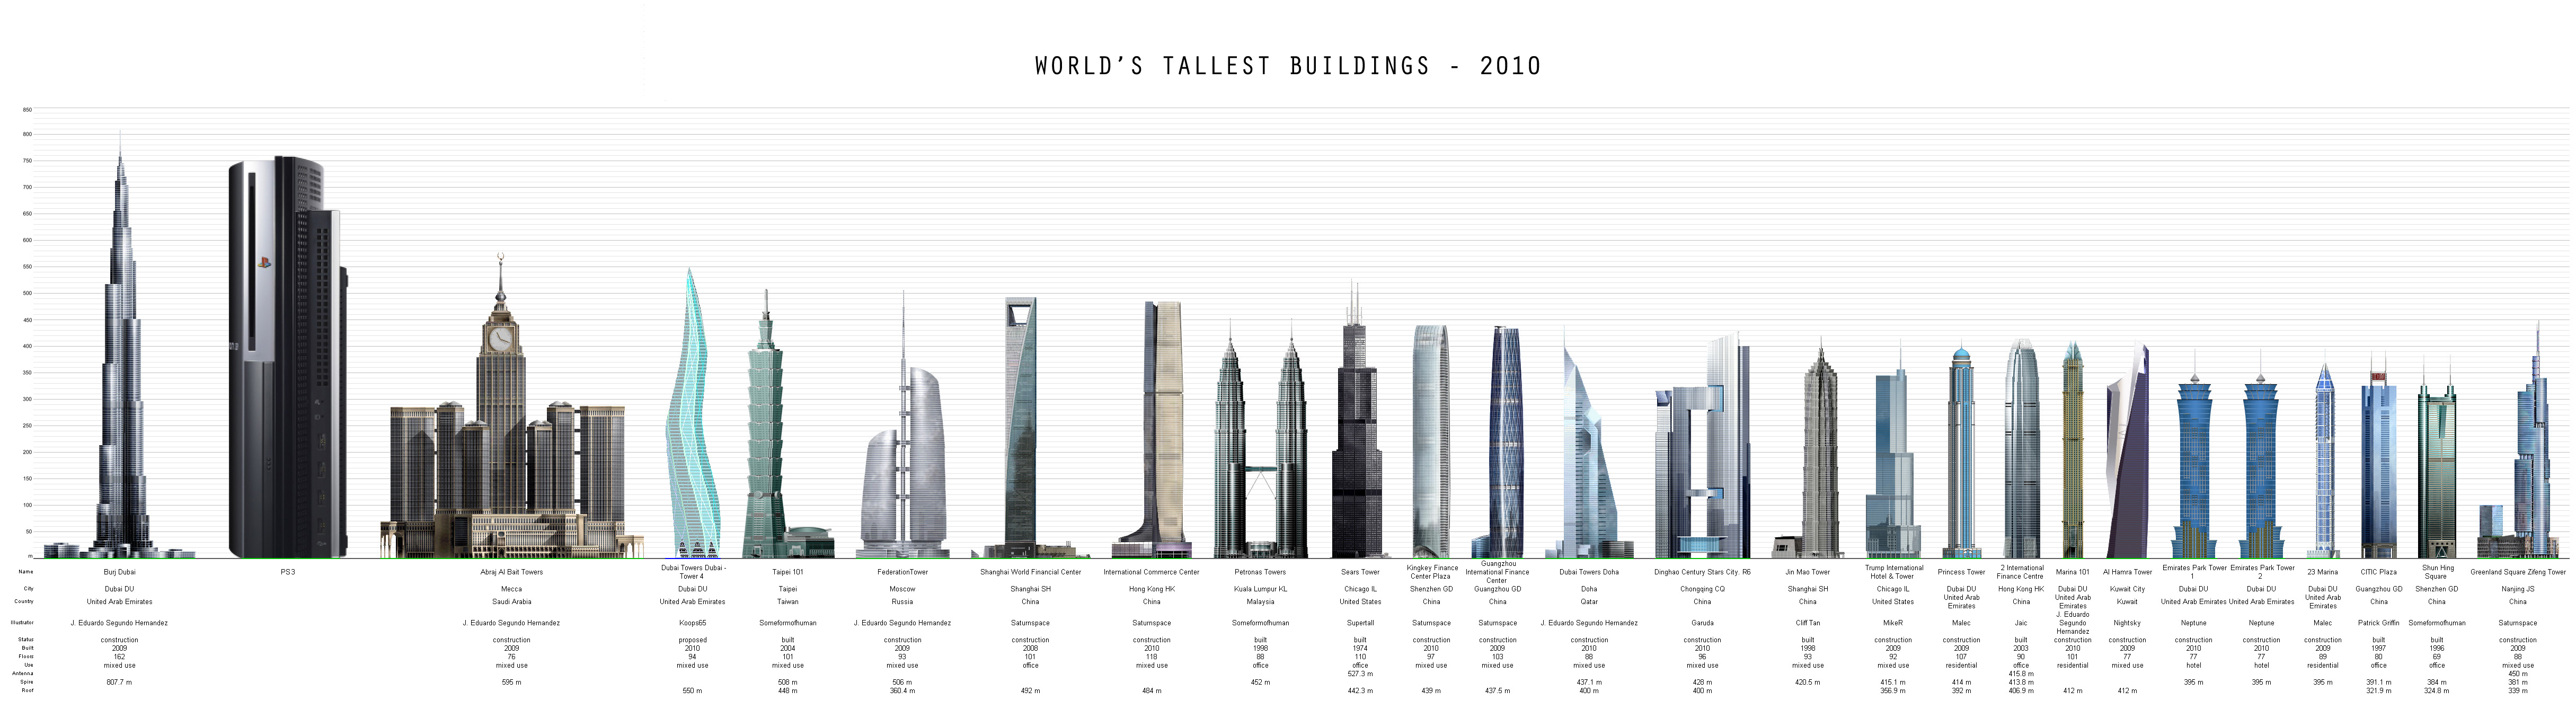 World S Tallest Buildings List Of Top 10 - www.inf-inet.com